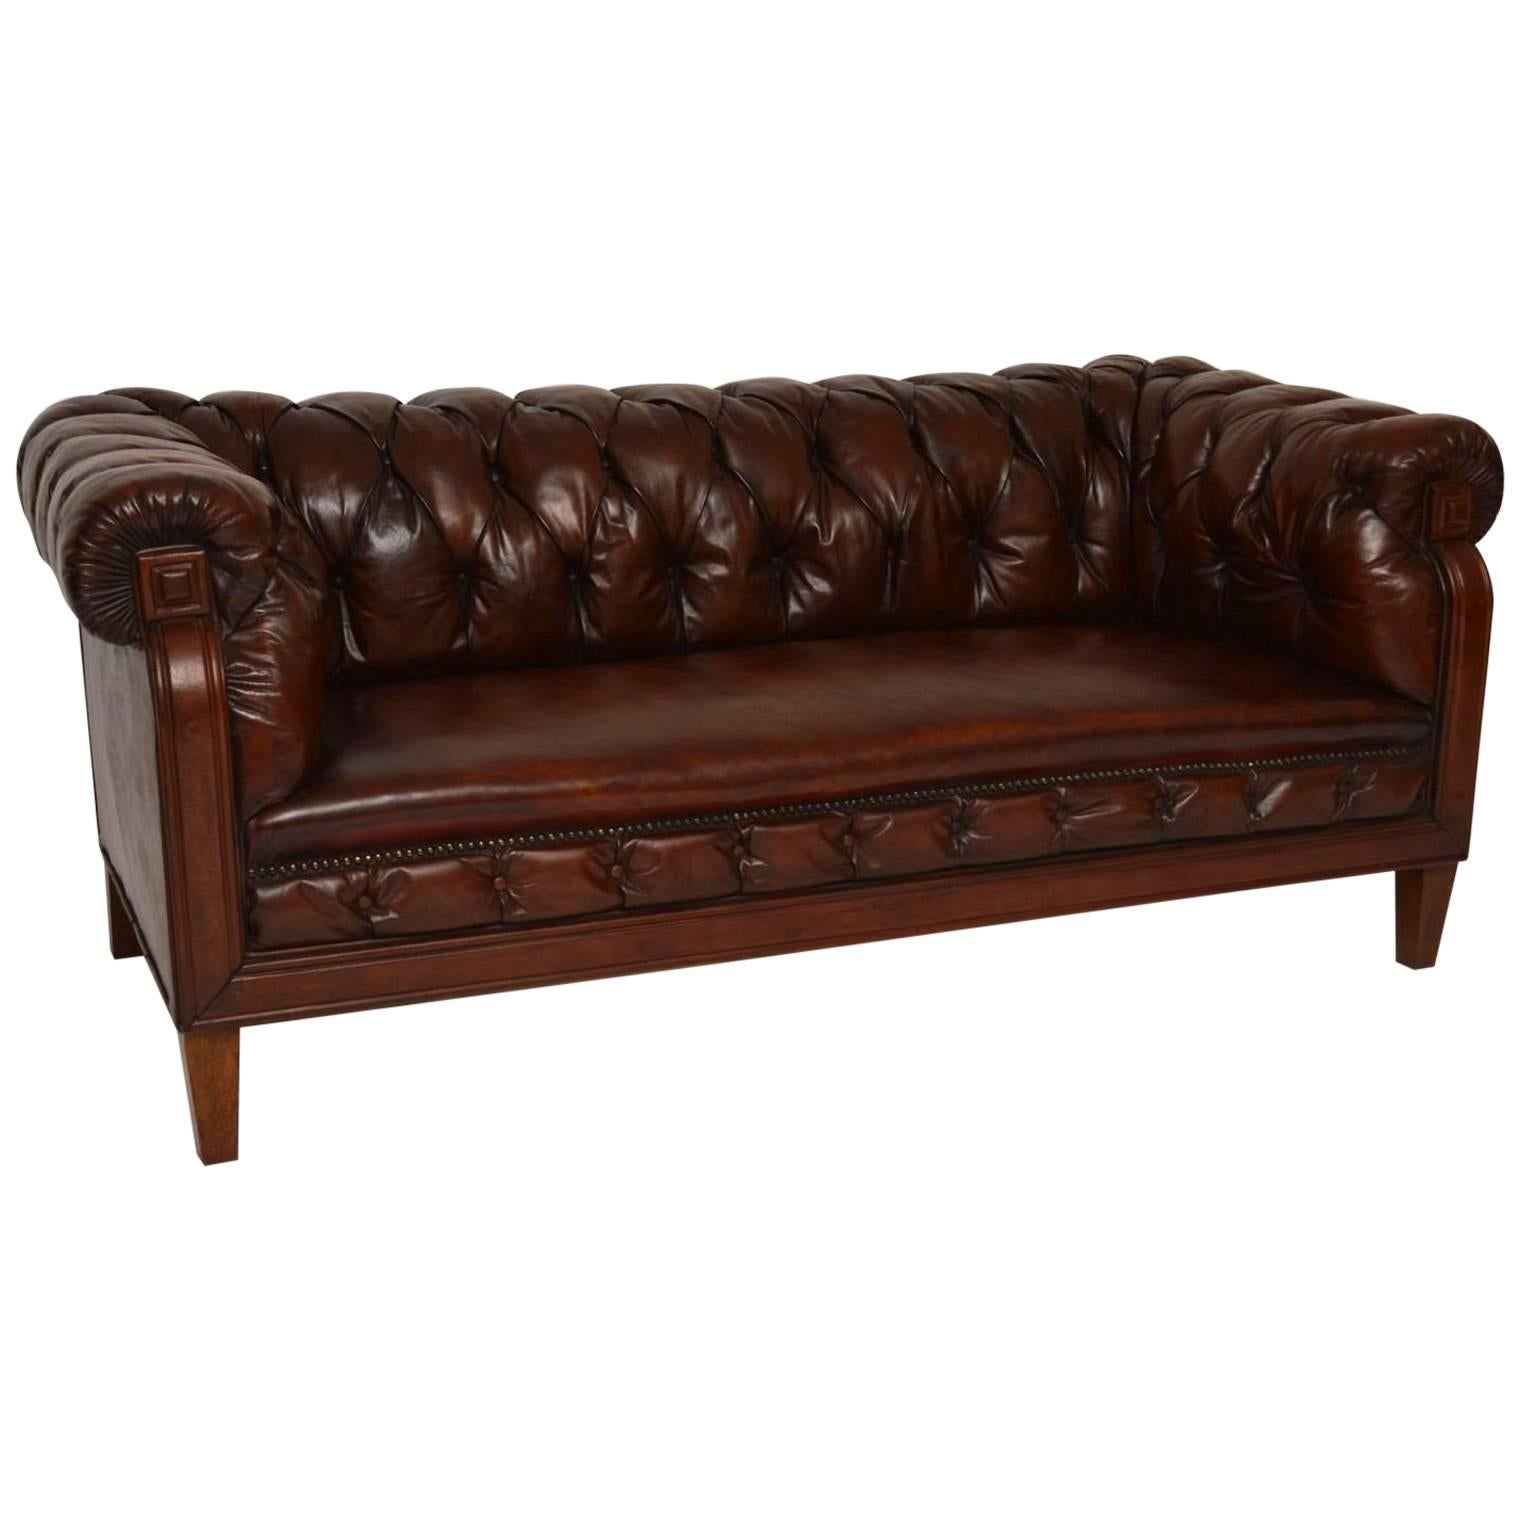 Antique Swedish Leather Chesterfield Sofa 